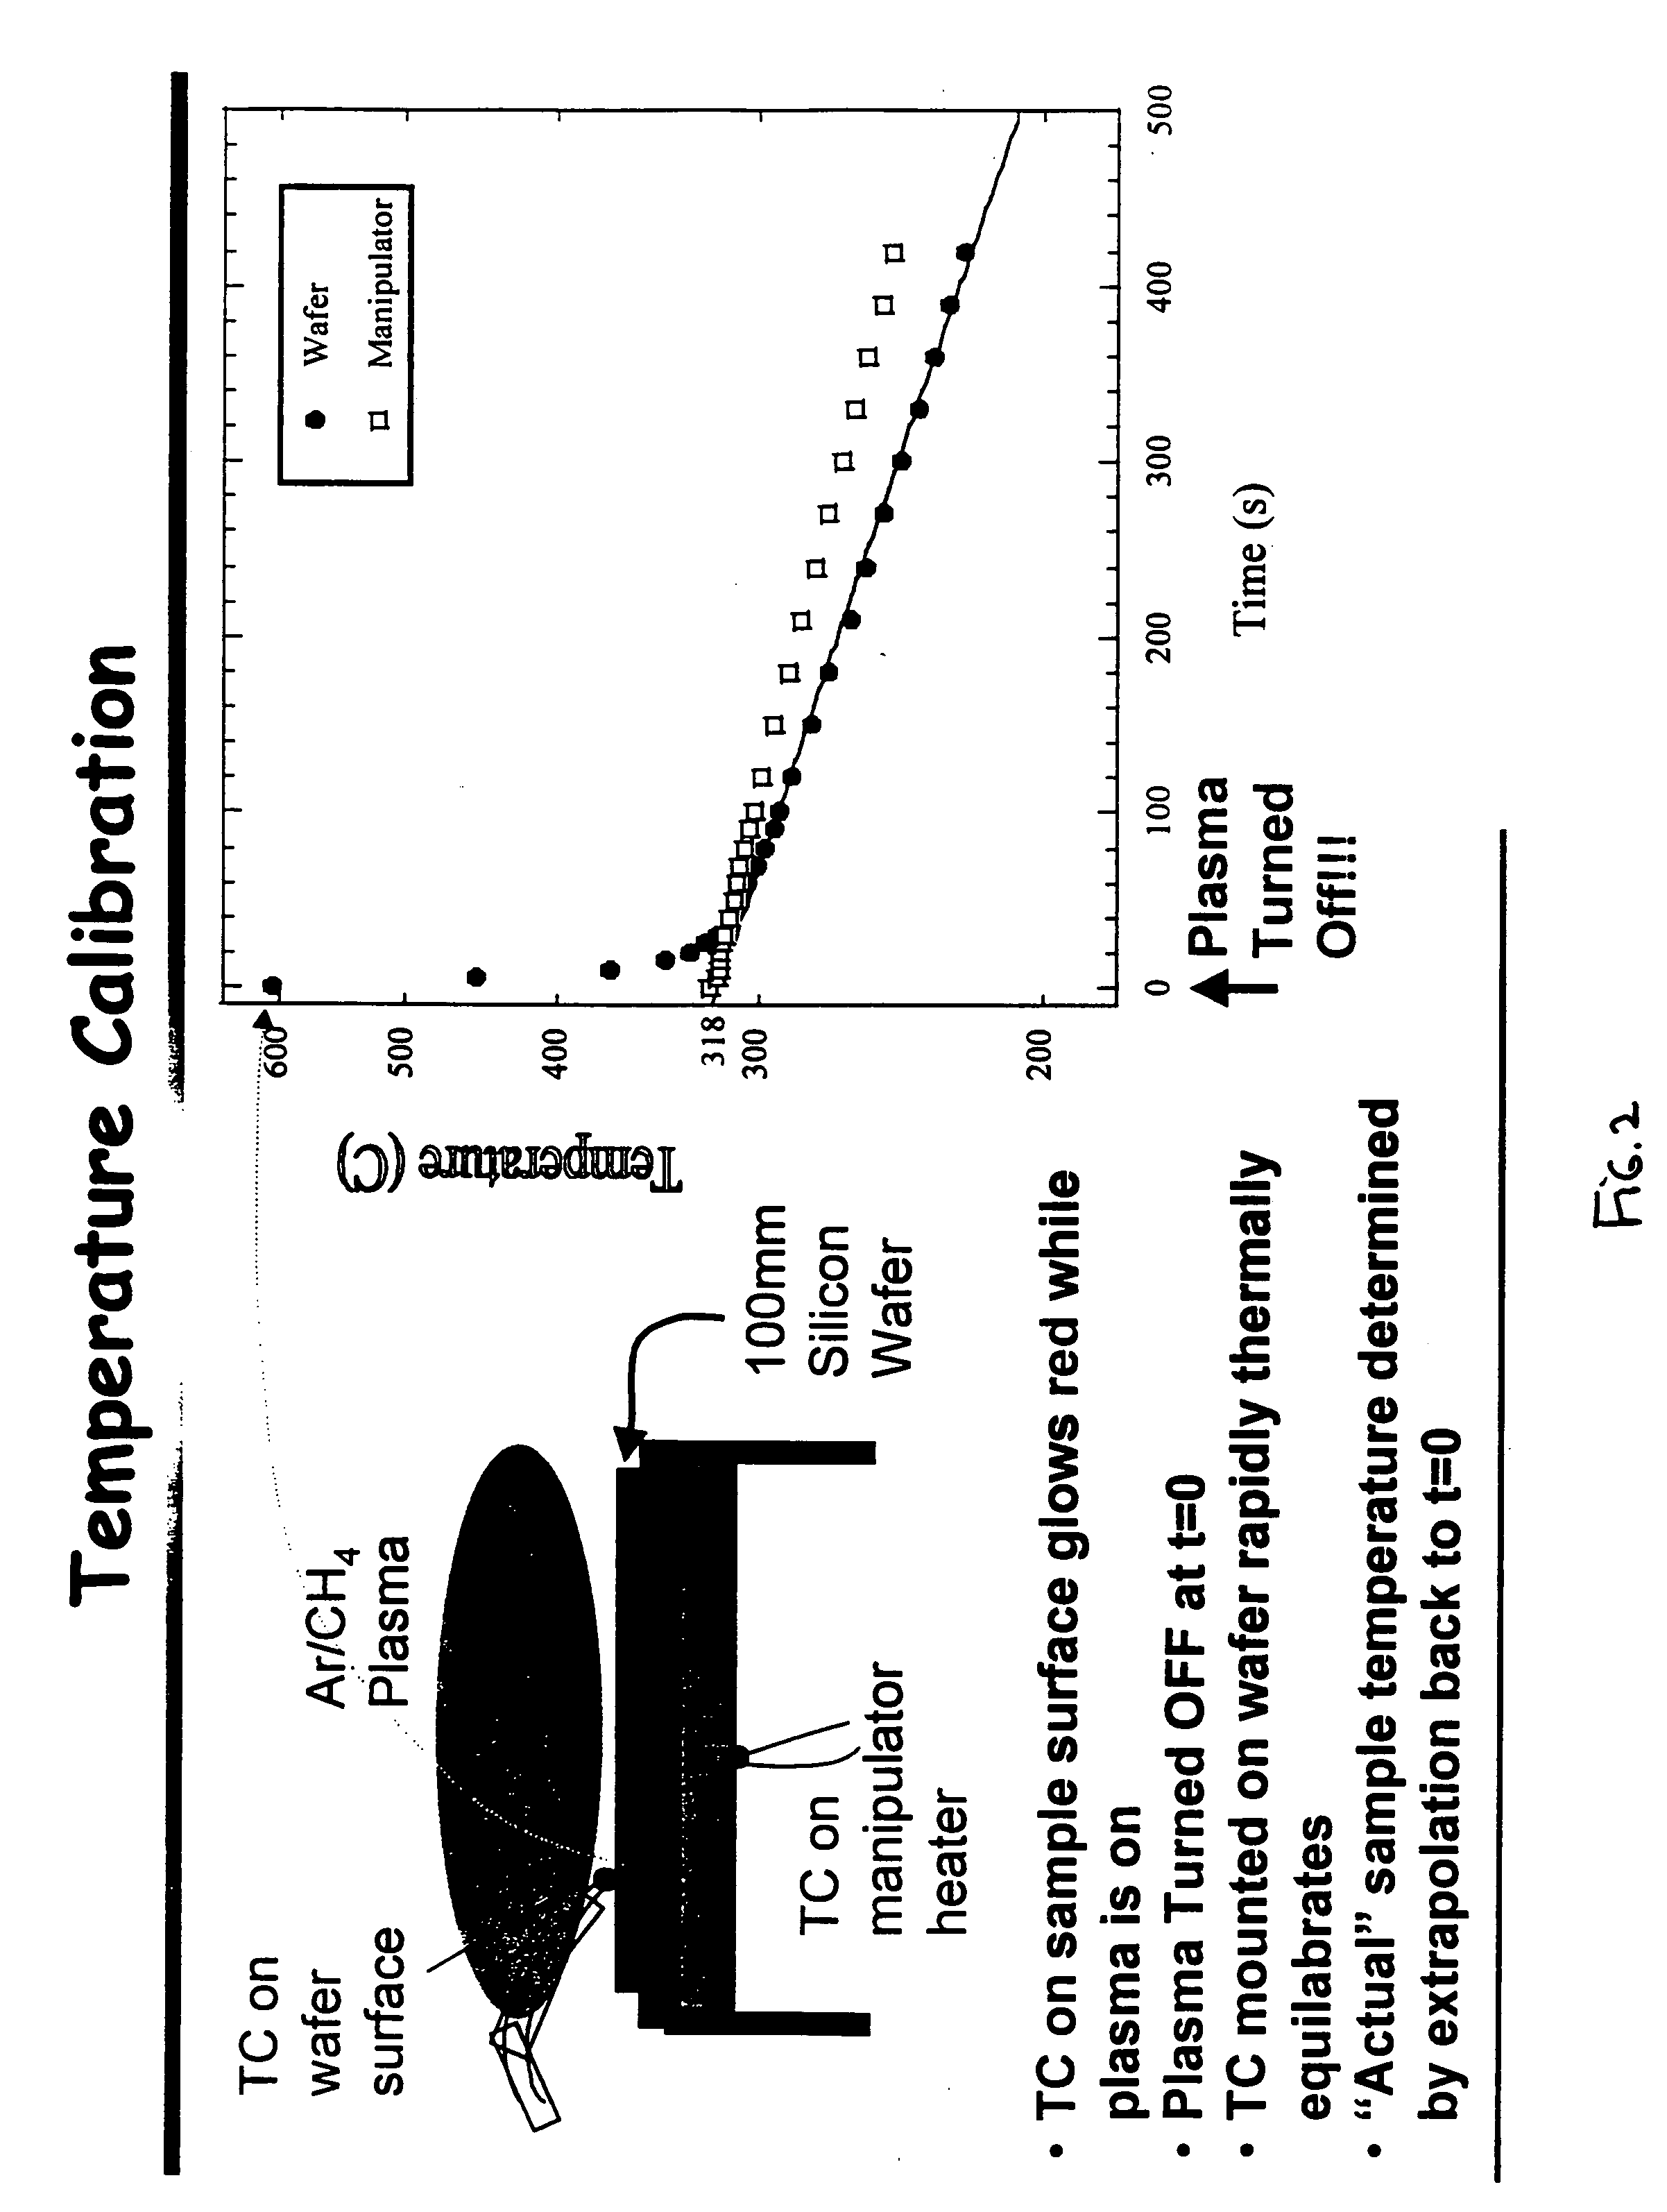 Method to grow pure nanocrystalline diamond films at low temperatures and high deposition rates